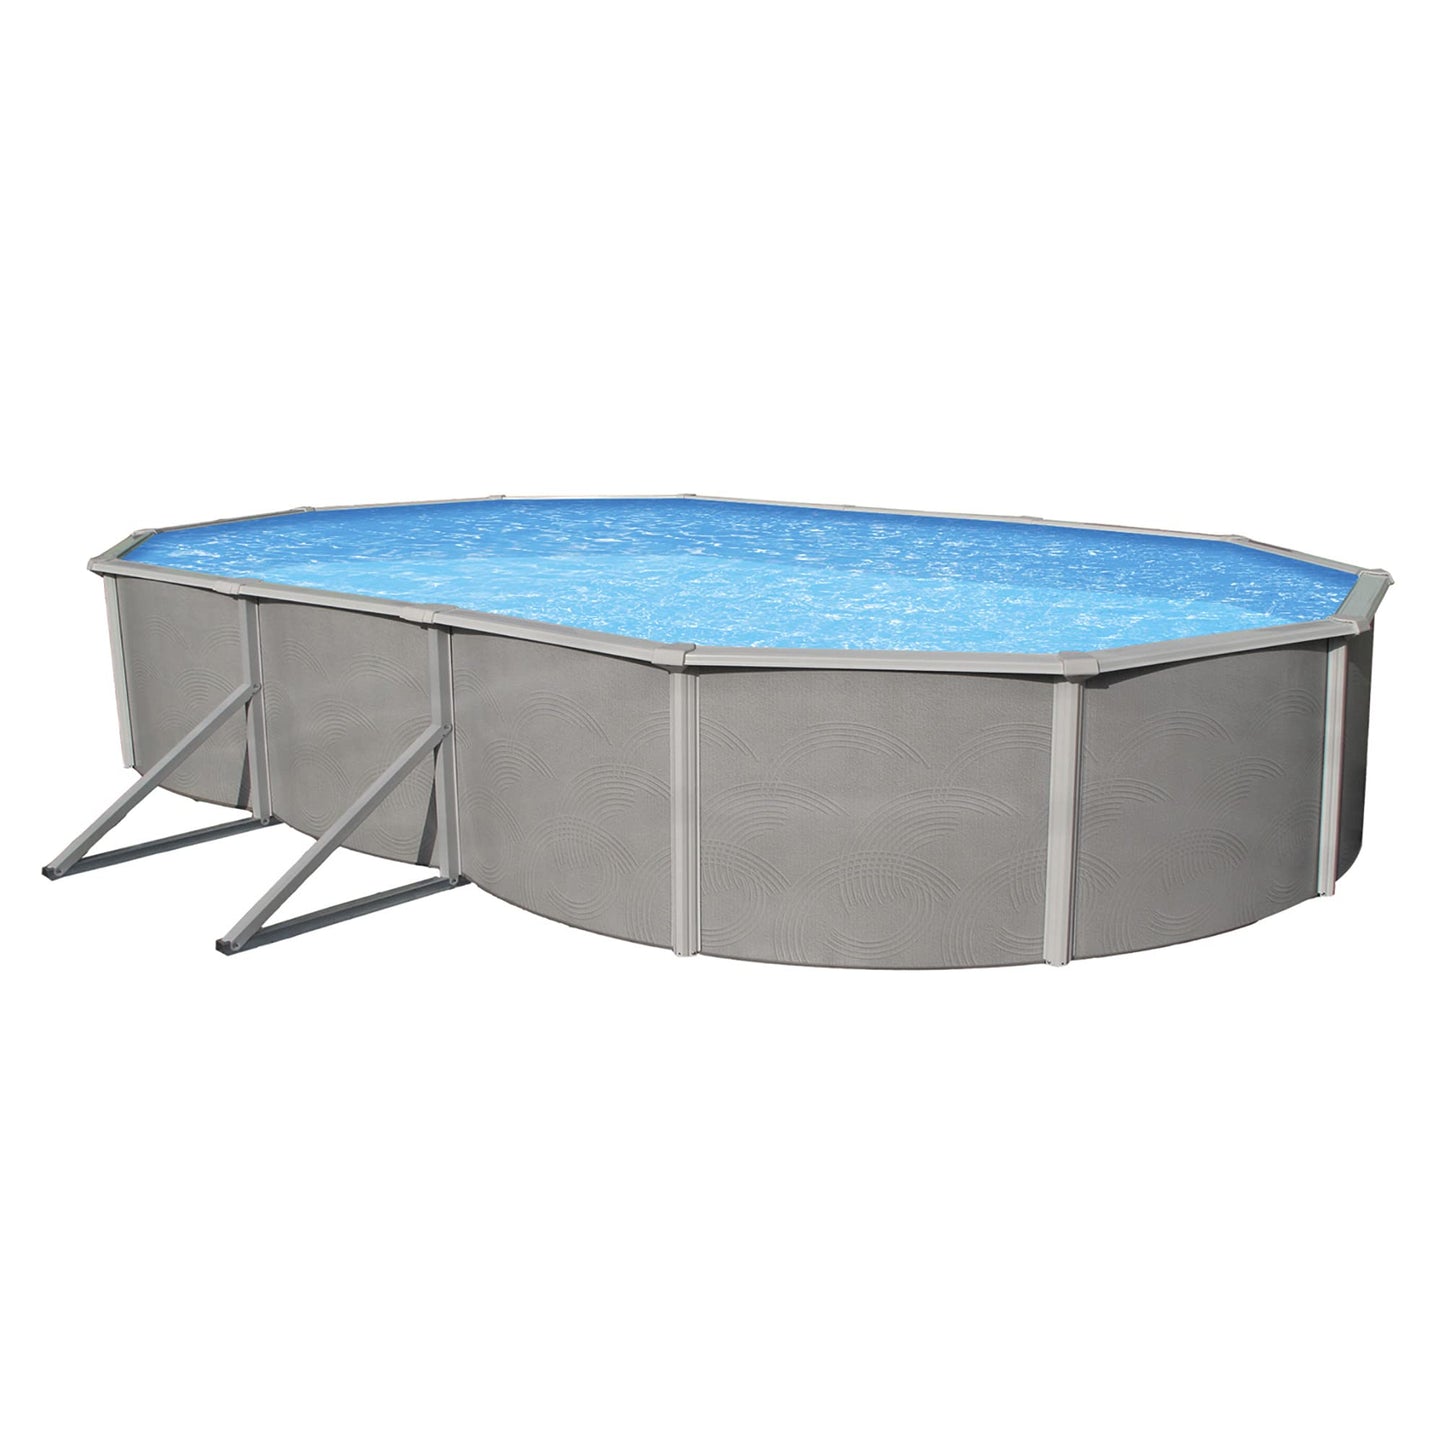 Blue Wave Belize 12-Feet by 24-Feet Oval 52-Inch Deep 6-Inch Top Rail Metal Wall Swimming Pool Package